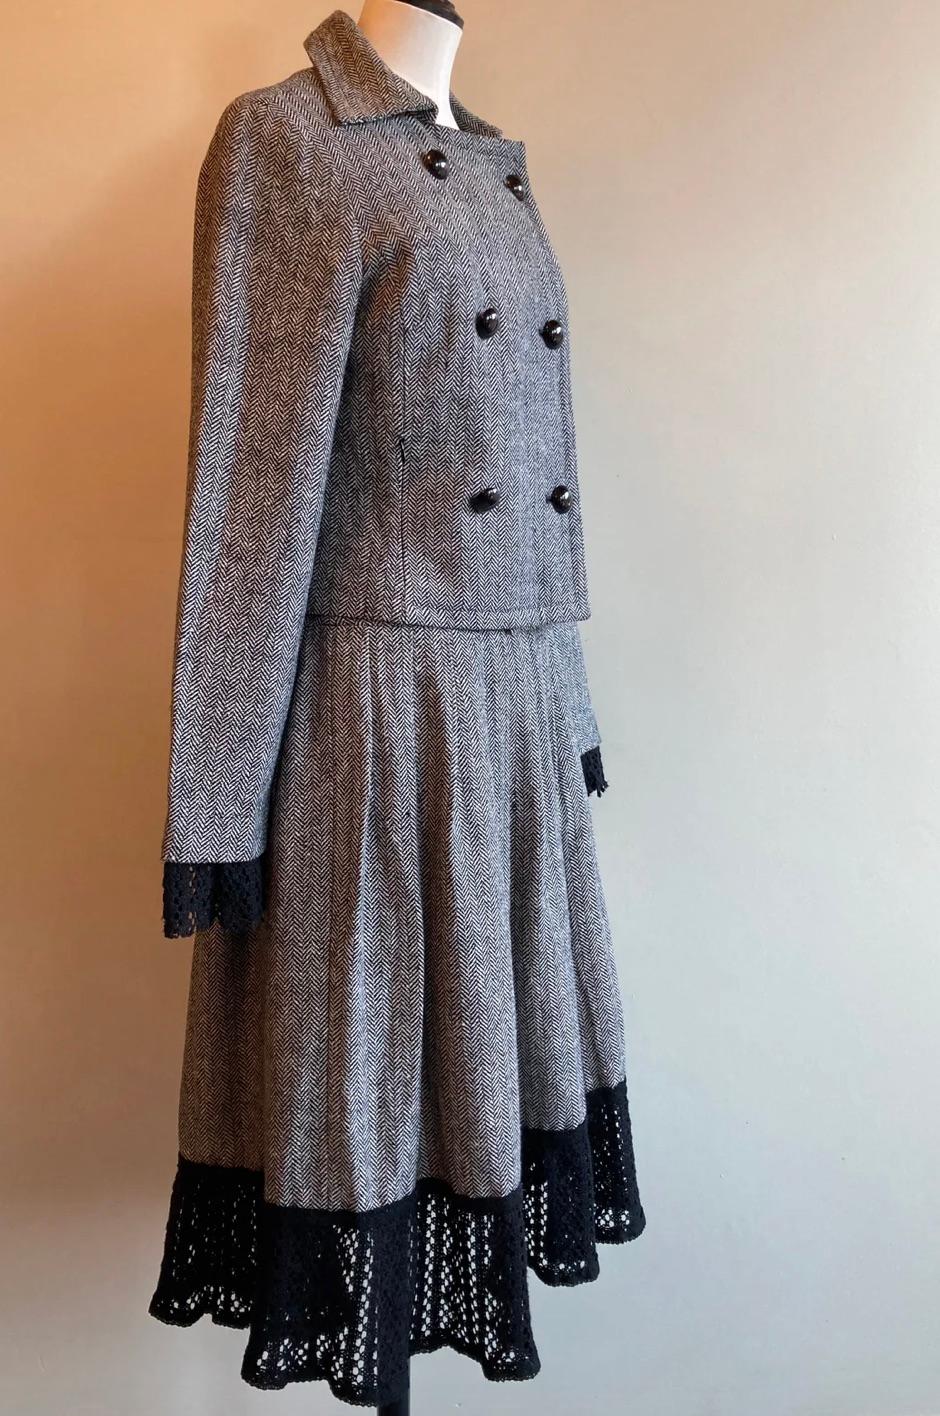 Marc Jacobs Houndstooth Skirt Suit In Good Condition For Sale In Glasgow, GB